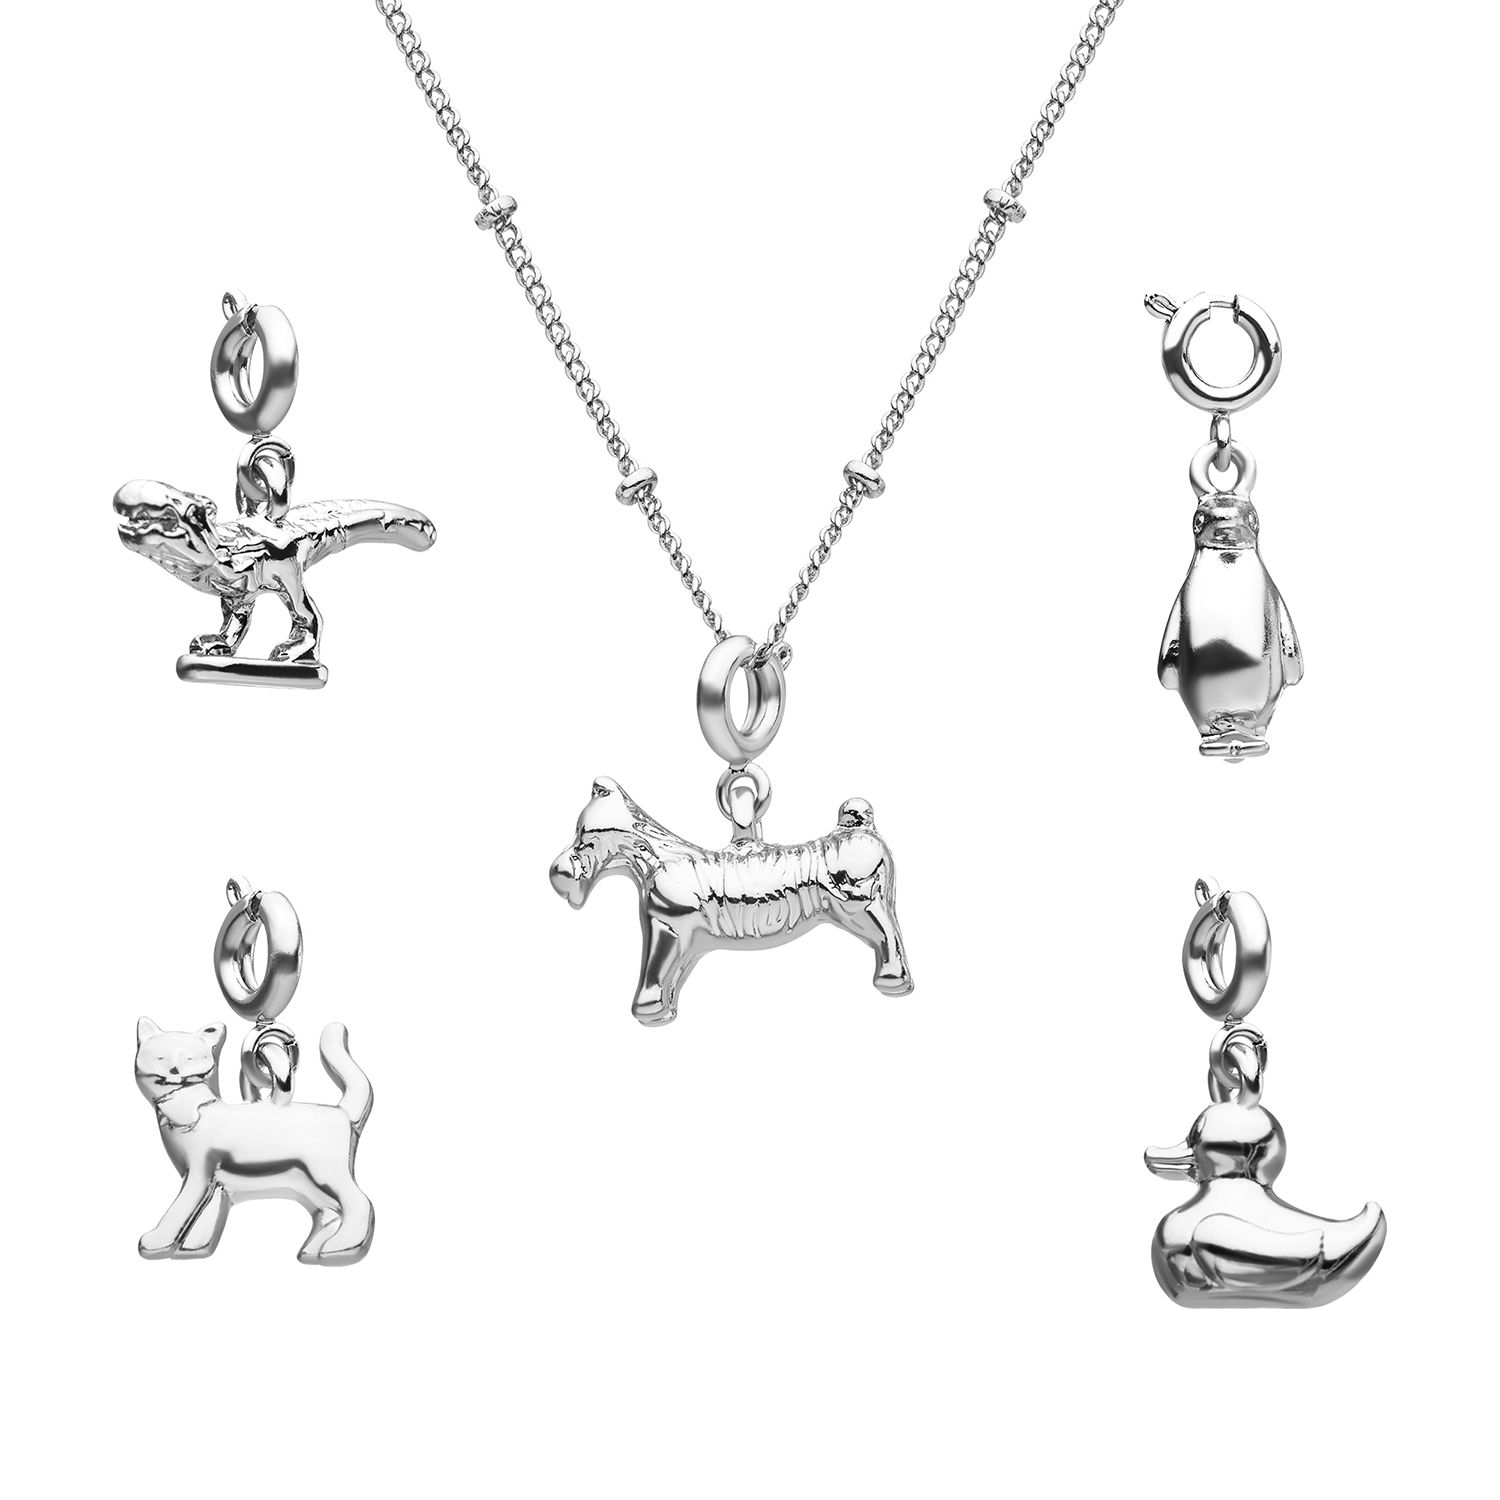 Image for Hasbro Monopoly Silver Tone Interchangeable Animal Tokens Pendant Necklace at Kohl's.